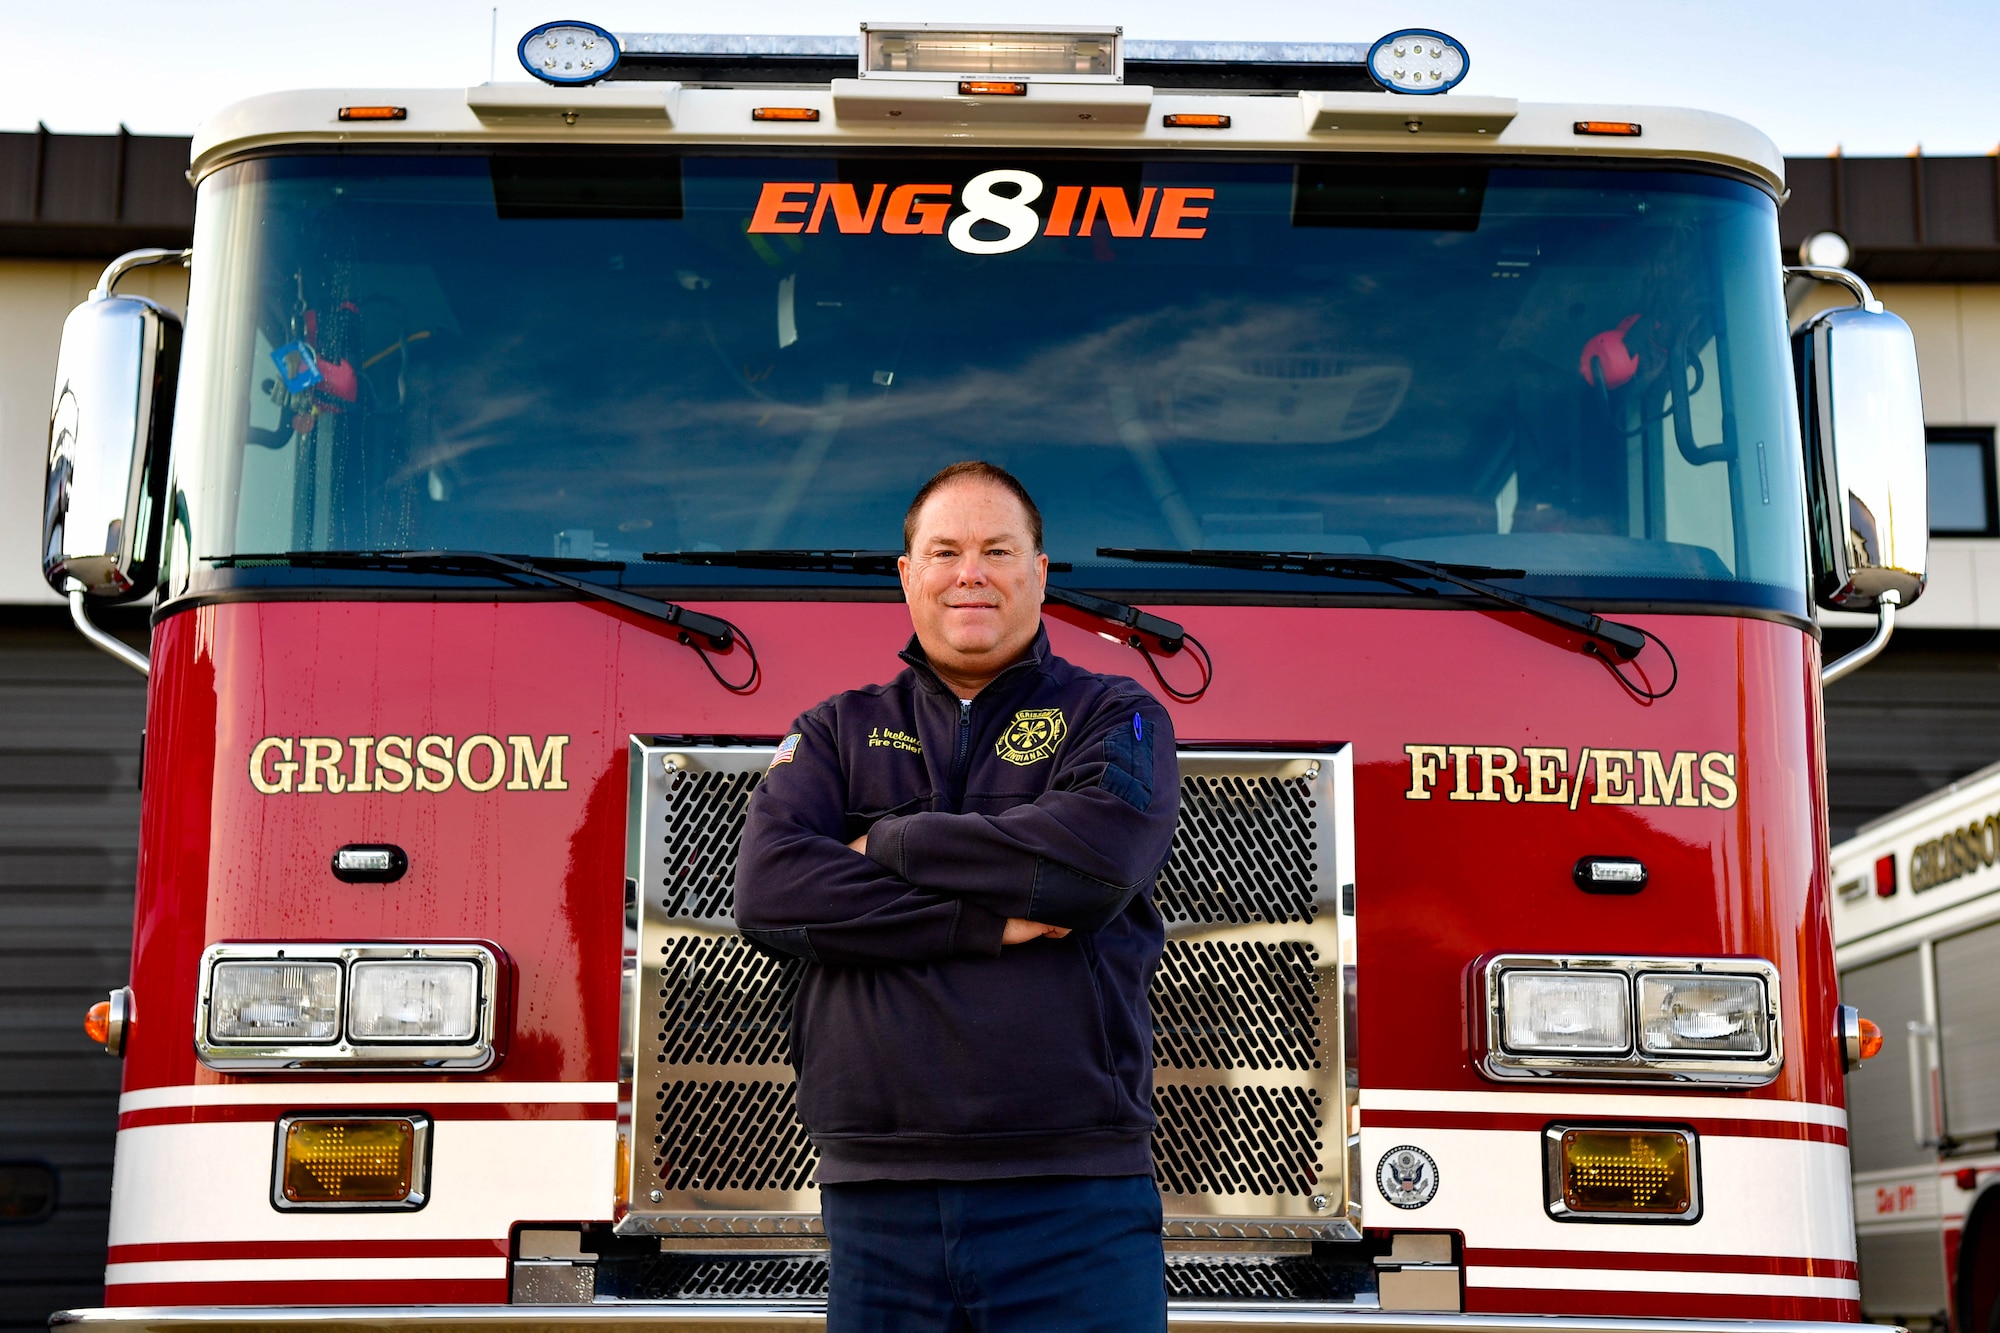 John Ireland, Grissom fire chief, poses in front of a fire truck at Grissom Air Reserve Base, Indiana, Oct. 13, 2021. Ireland won the Indiana Emergency Responders Conference Fire Chief of the Year award. (U.S. Air Force photo by Staff Sgt. Jeremy Blocker)